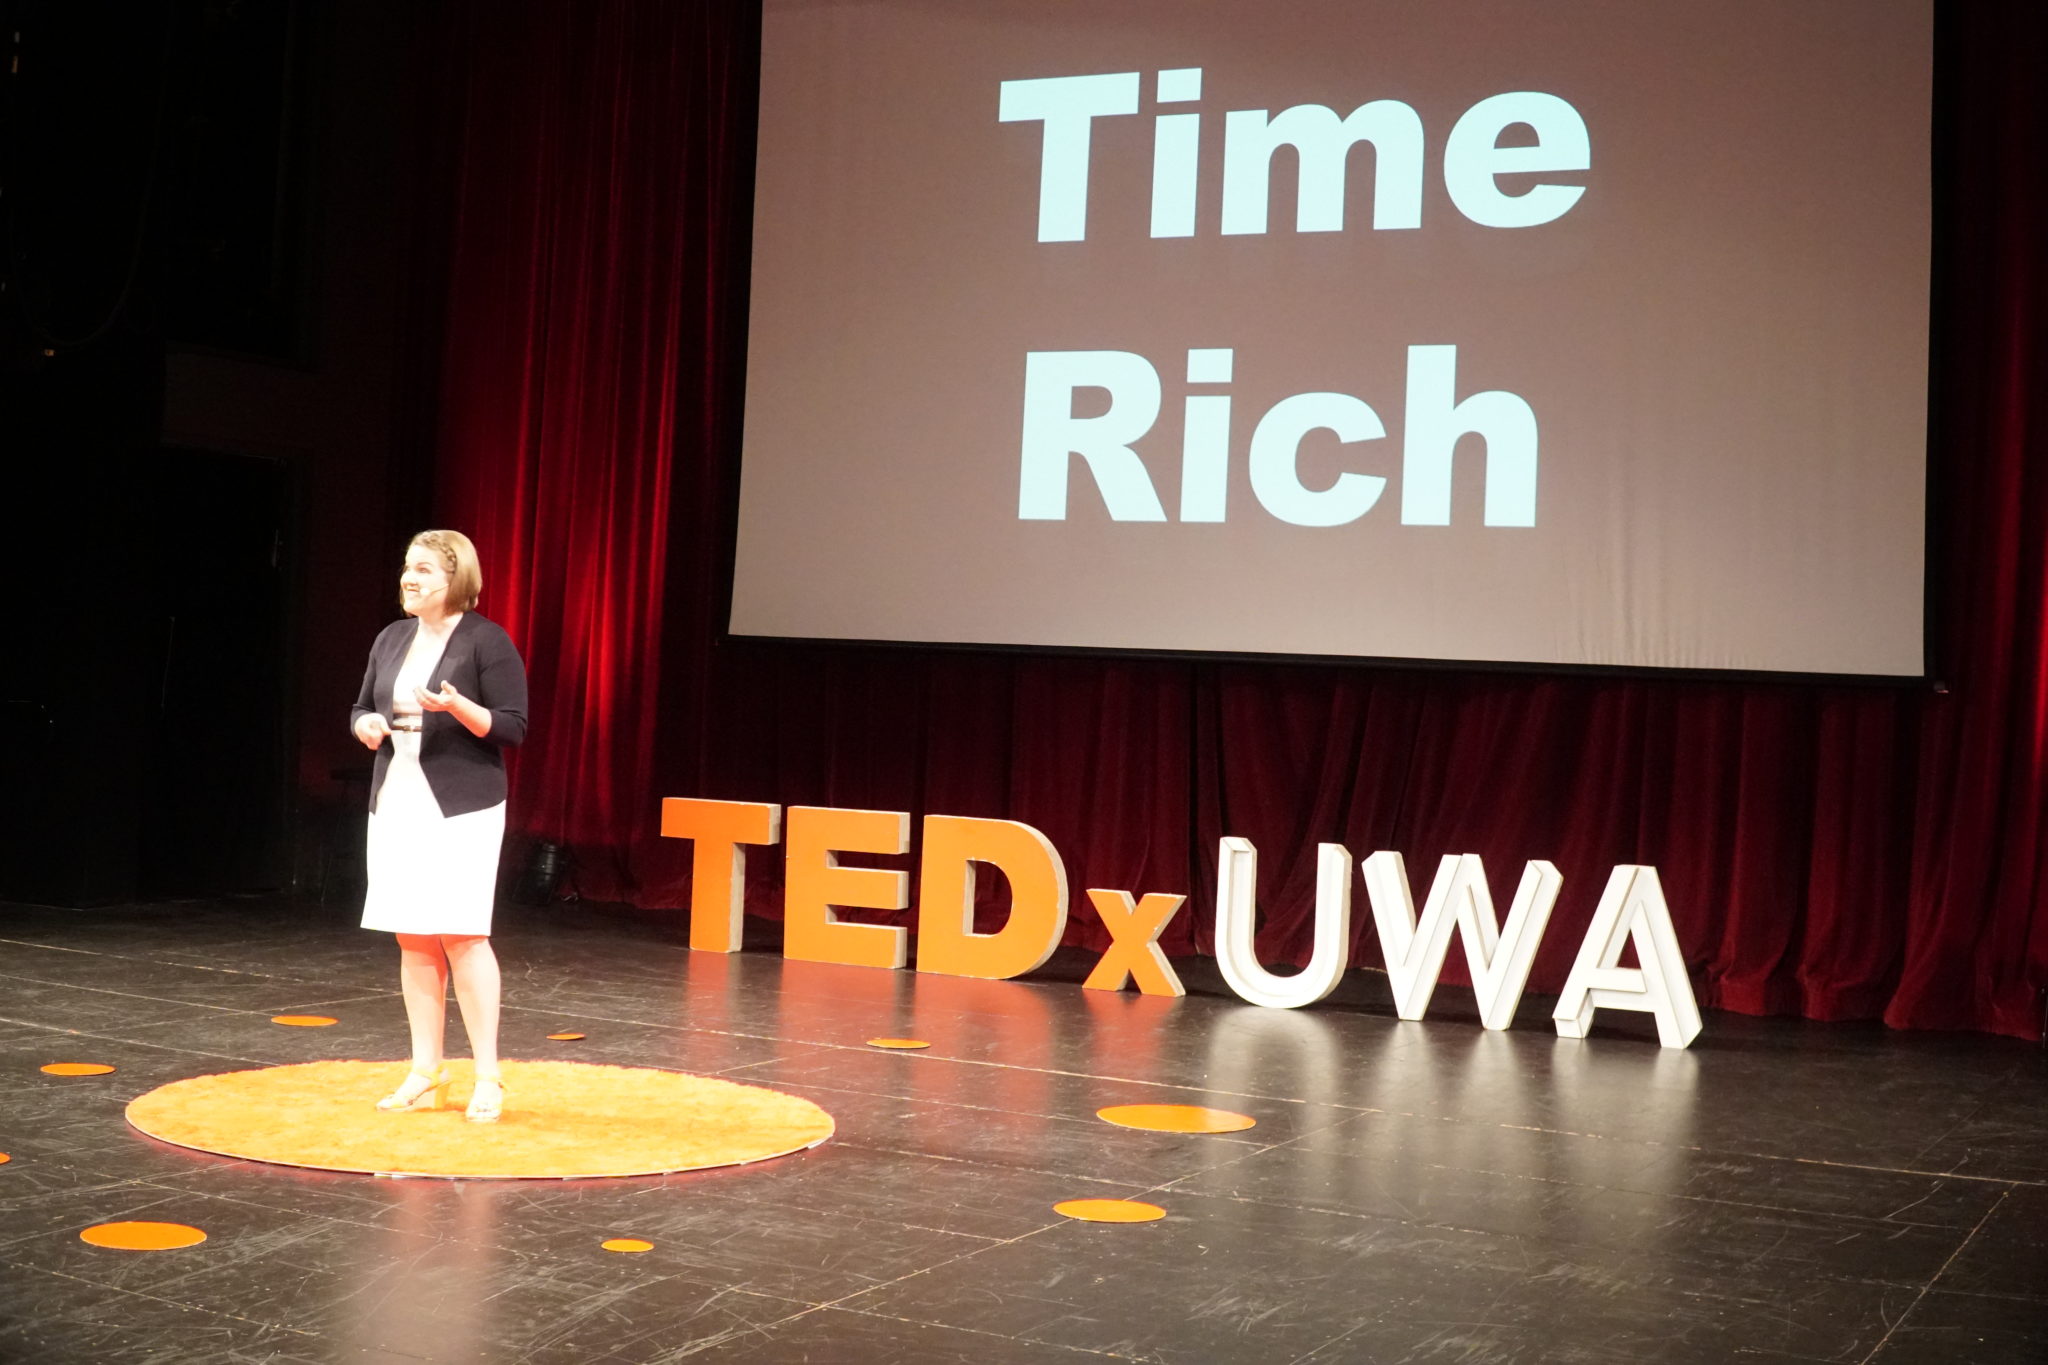 Our TEDxUWA talk: why you should think about financial independence and mini-retirements